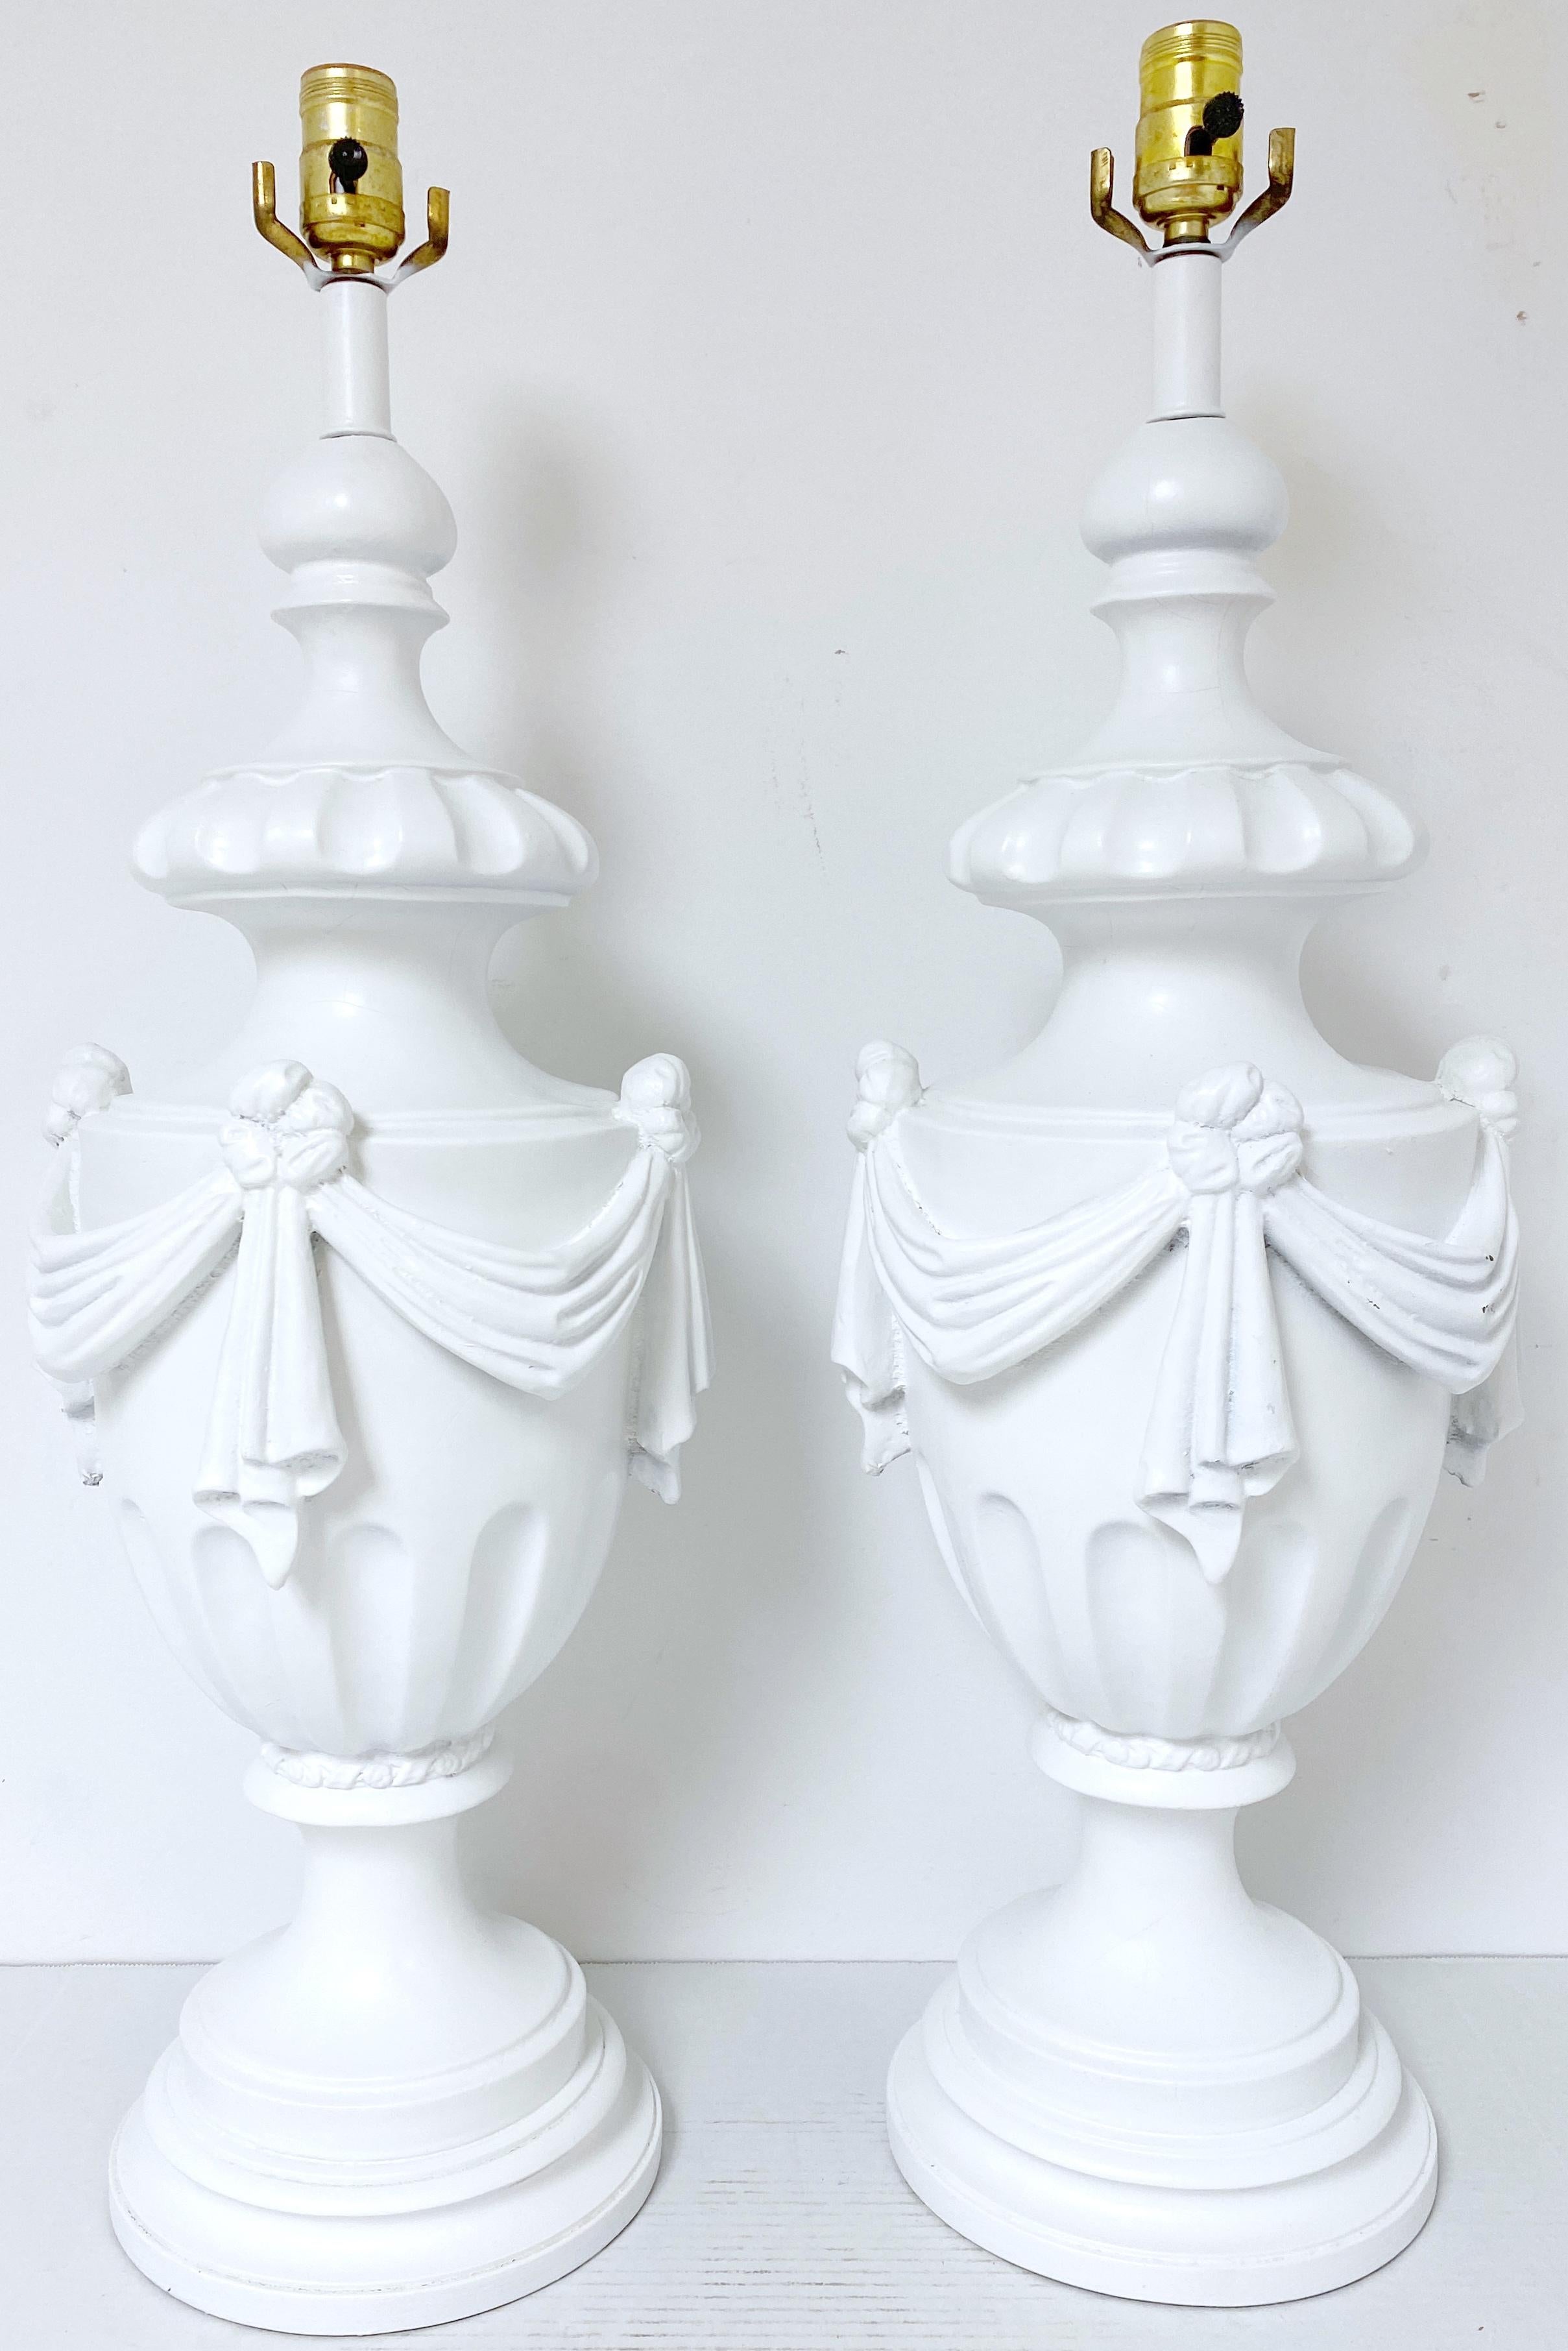 Large Pair of Hollywood Regency Neoclassical White Lacquered Draped Urn Lamps 
USA, Circa 1950s

Add a touch of quiet glamour to  your living space with a touch of elegance through this exquisite pair of Large , Pair of Hollywood Regency